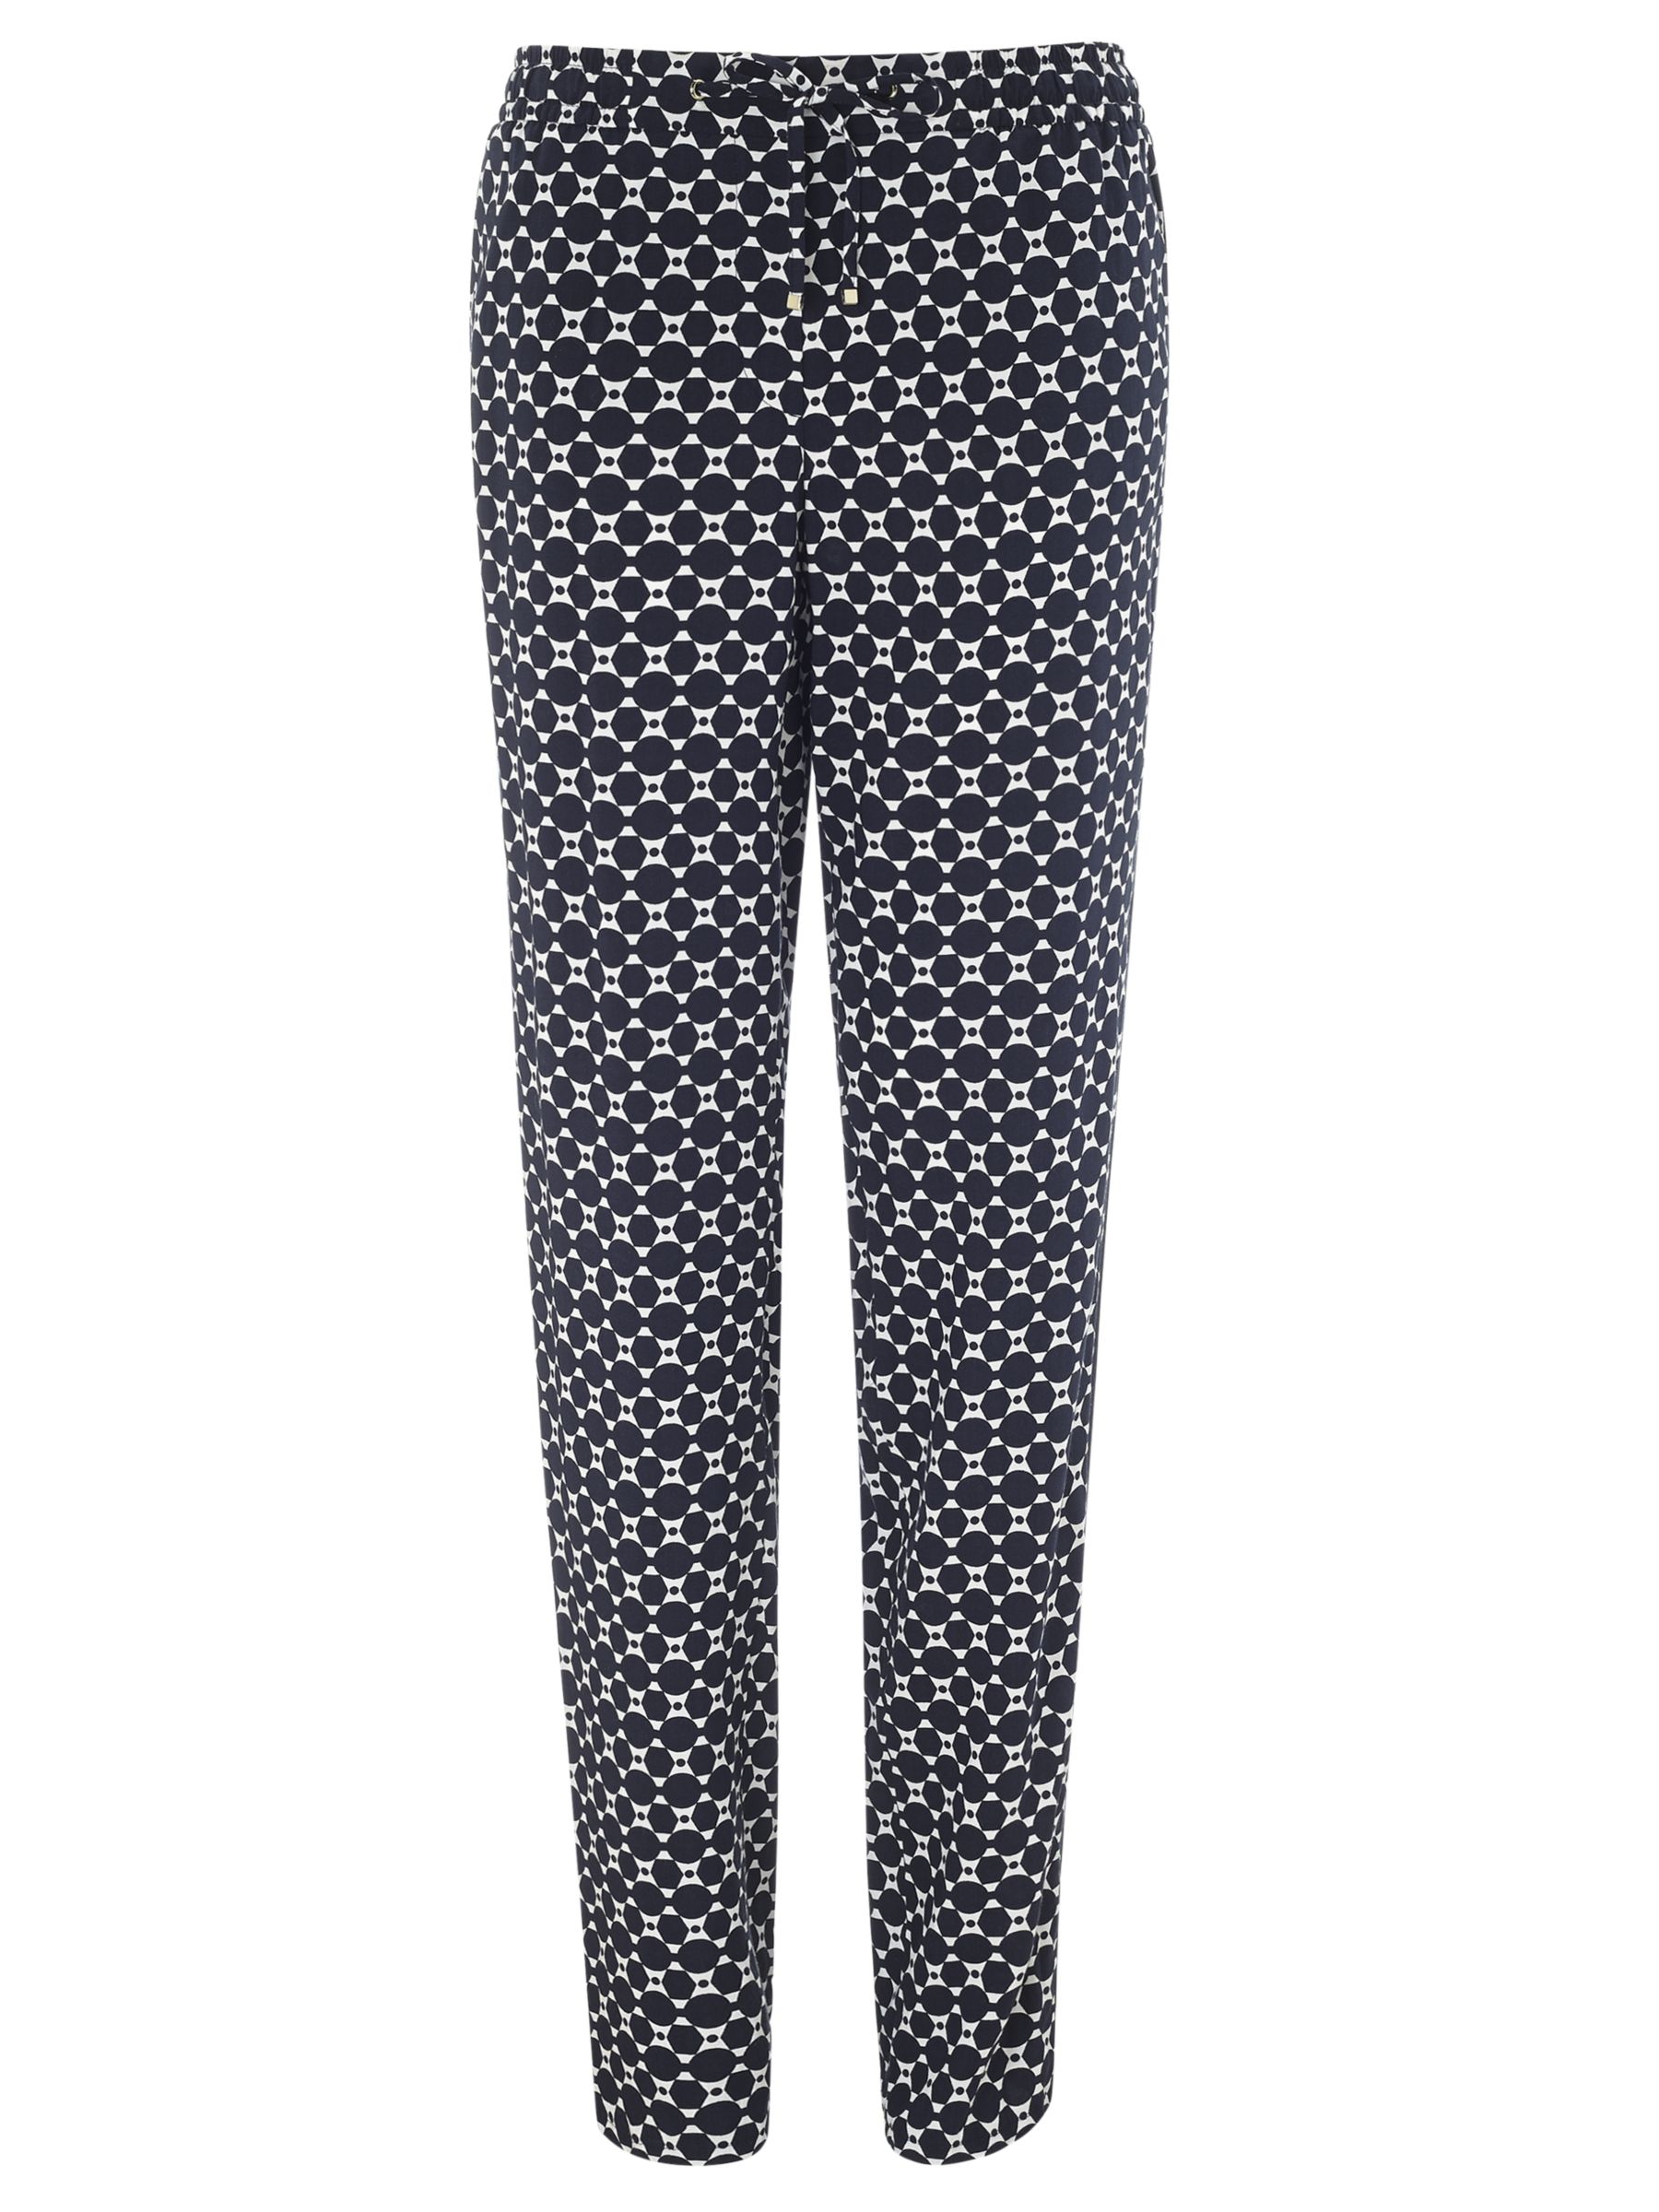 Women's trousers | Work trousers & chinos | John Lewis